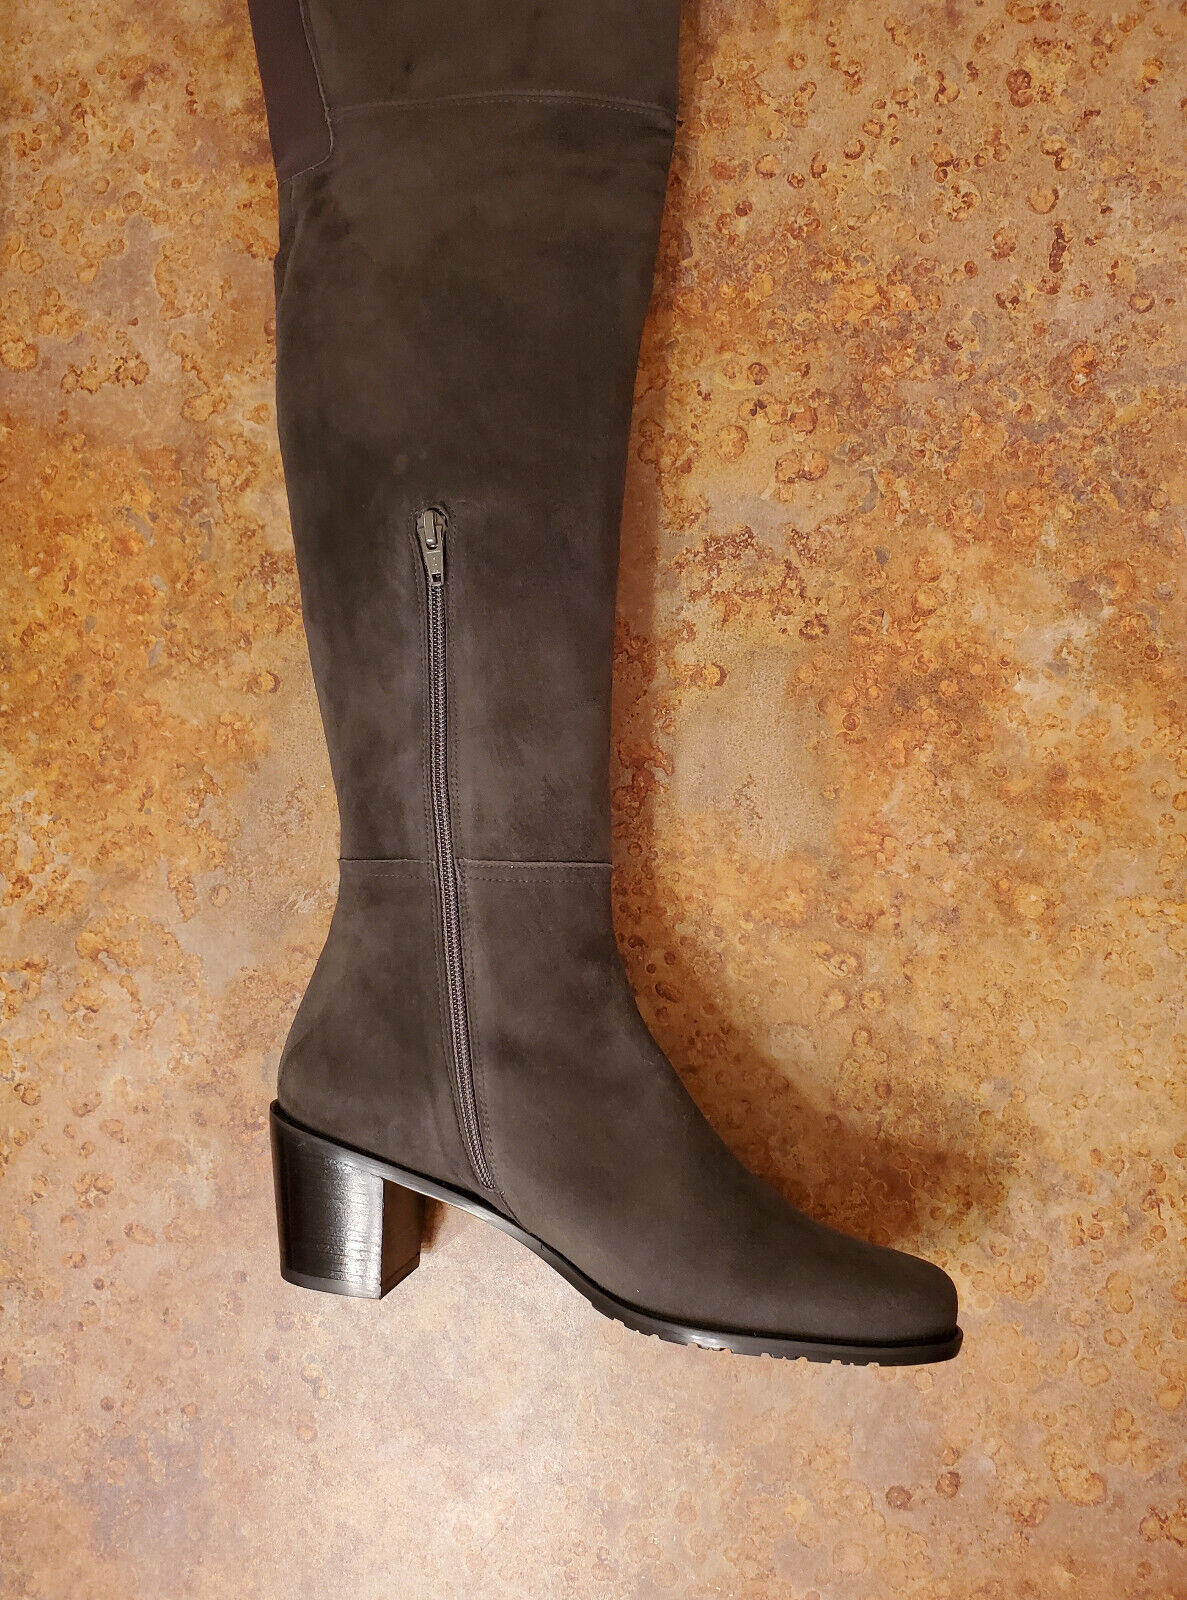 Pre-owned Stuart Weitzman 'hitest' Over The Knee Boots Slate Womens 9 B Msrp $875 In Gray